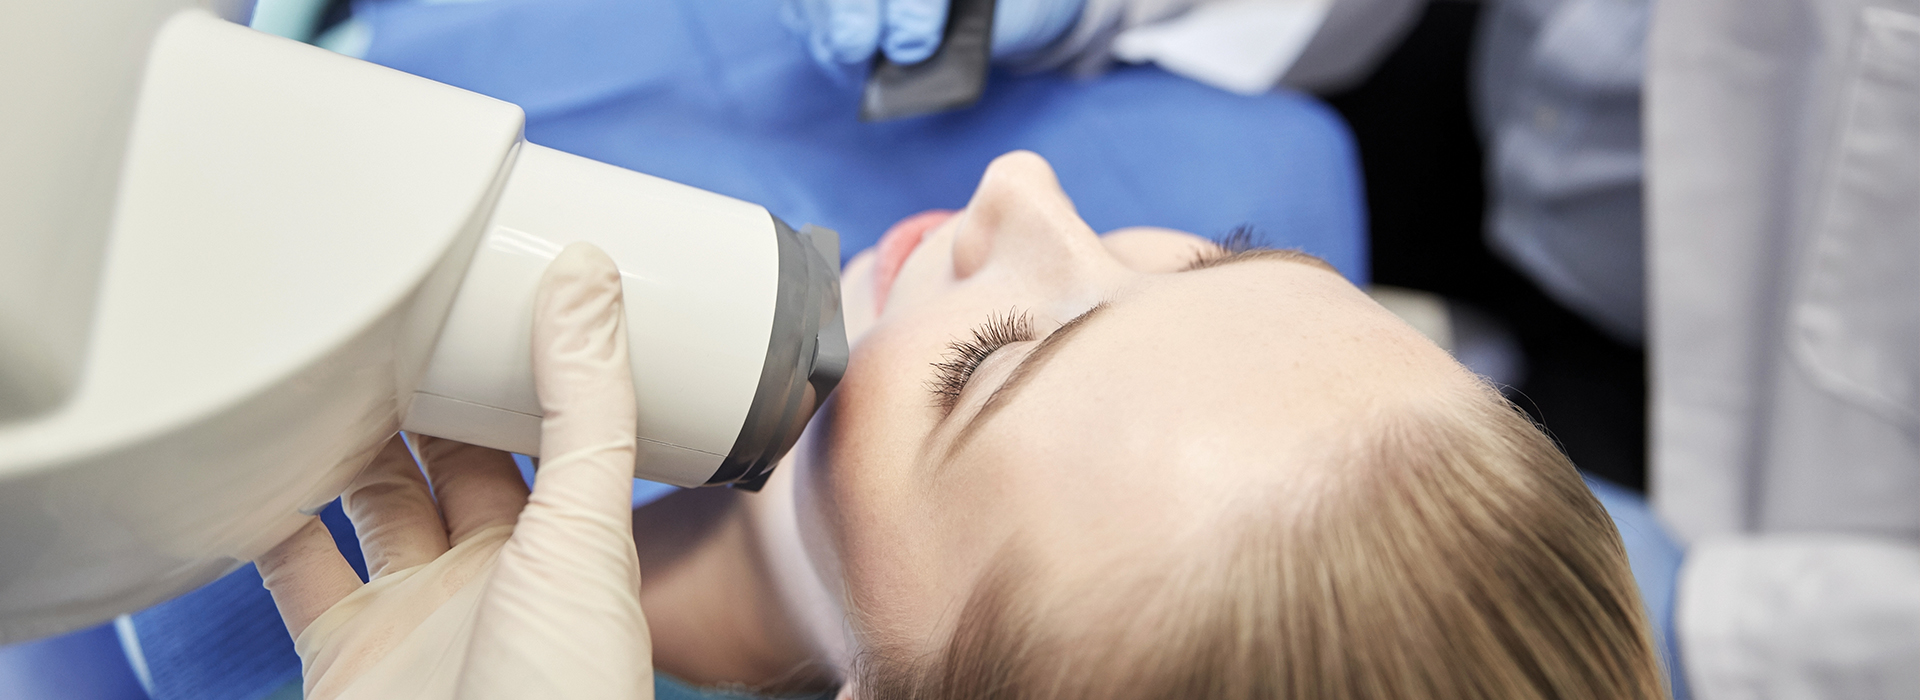 New Image Dentistry | A.I. X-Rays, Dental Fillings and Night Guards